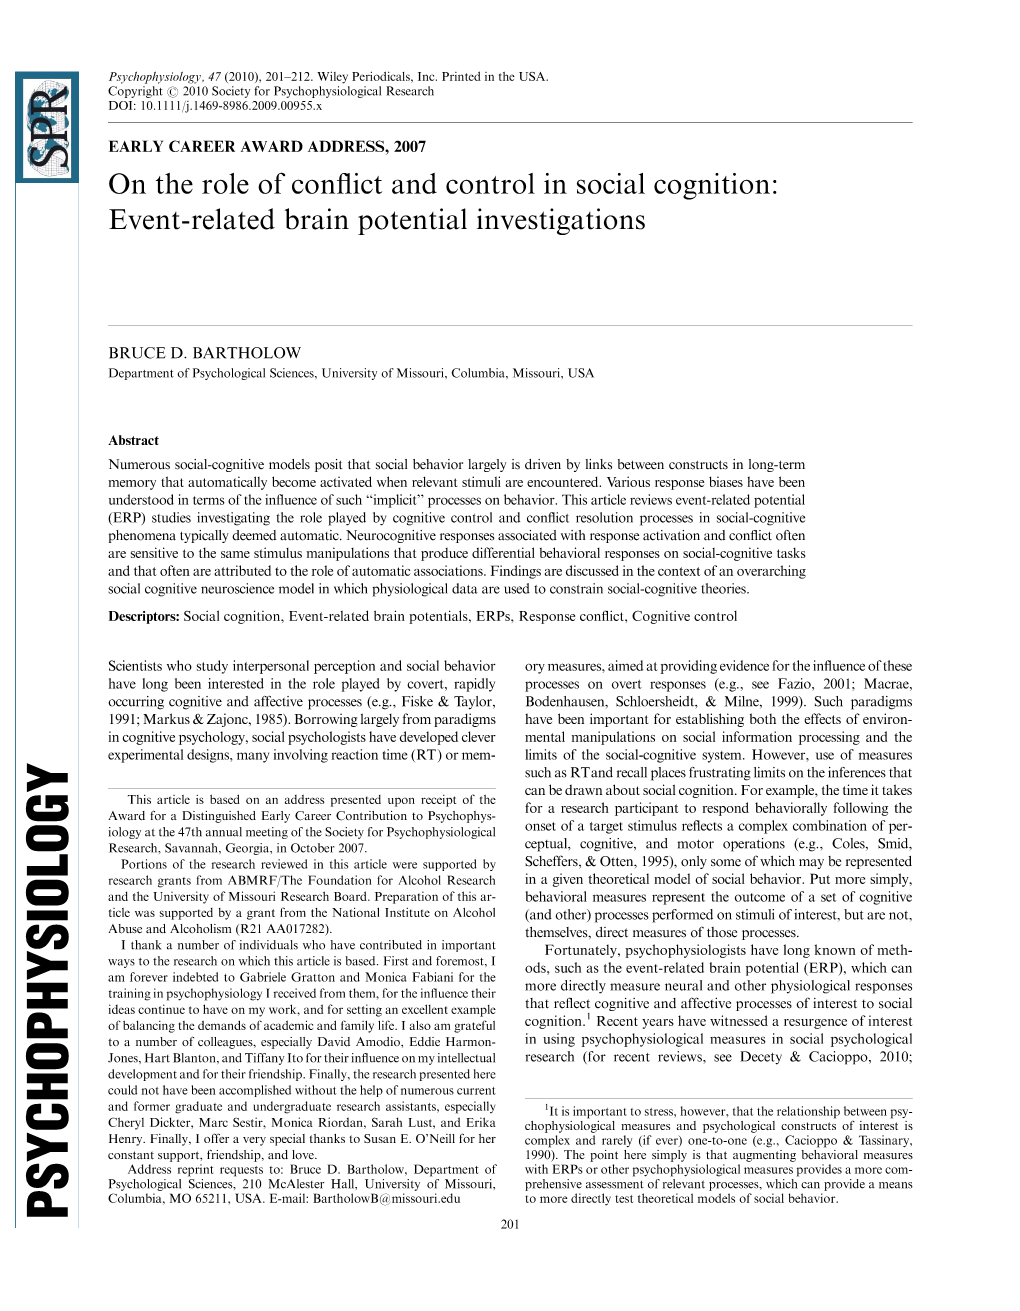 On the Role of Conflict and Control in Social Cognition: Event-Related Brain